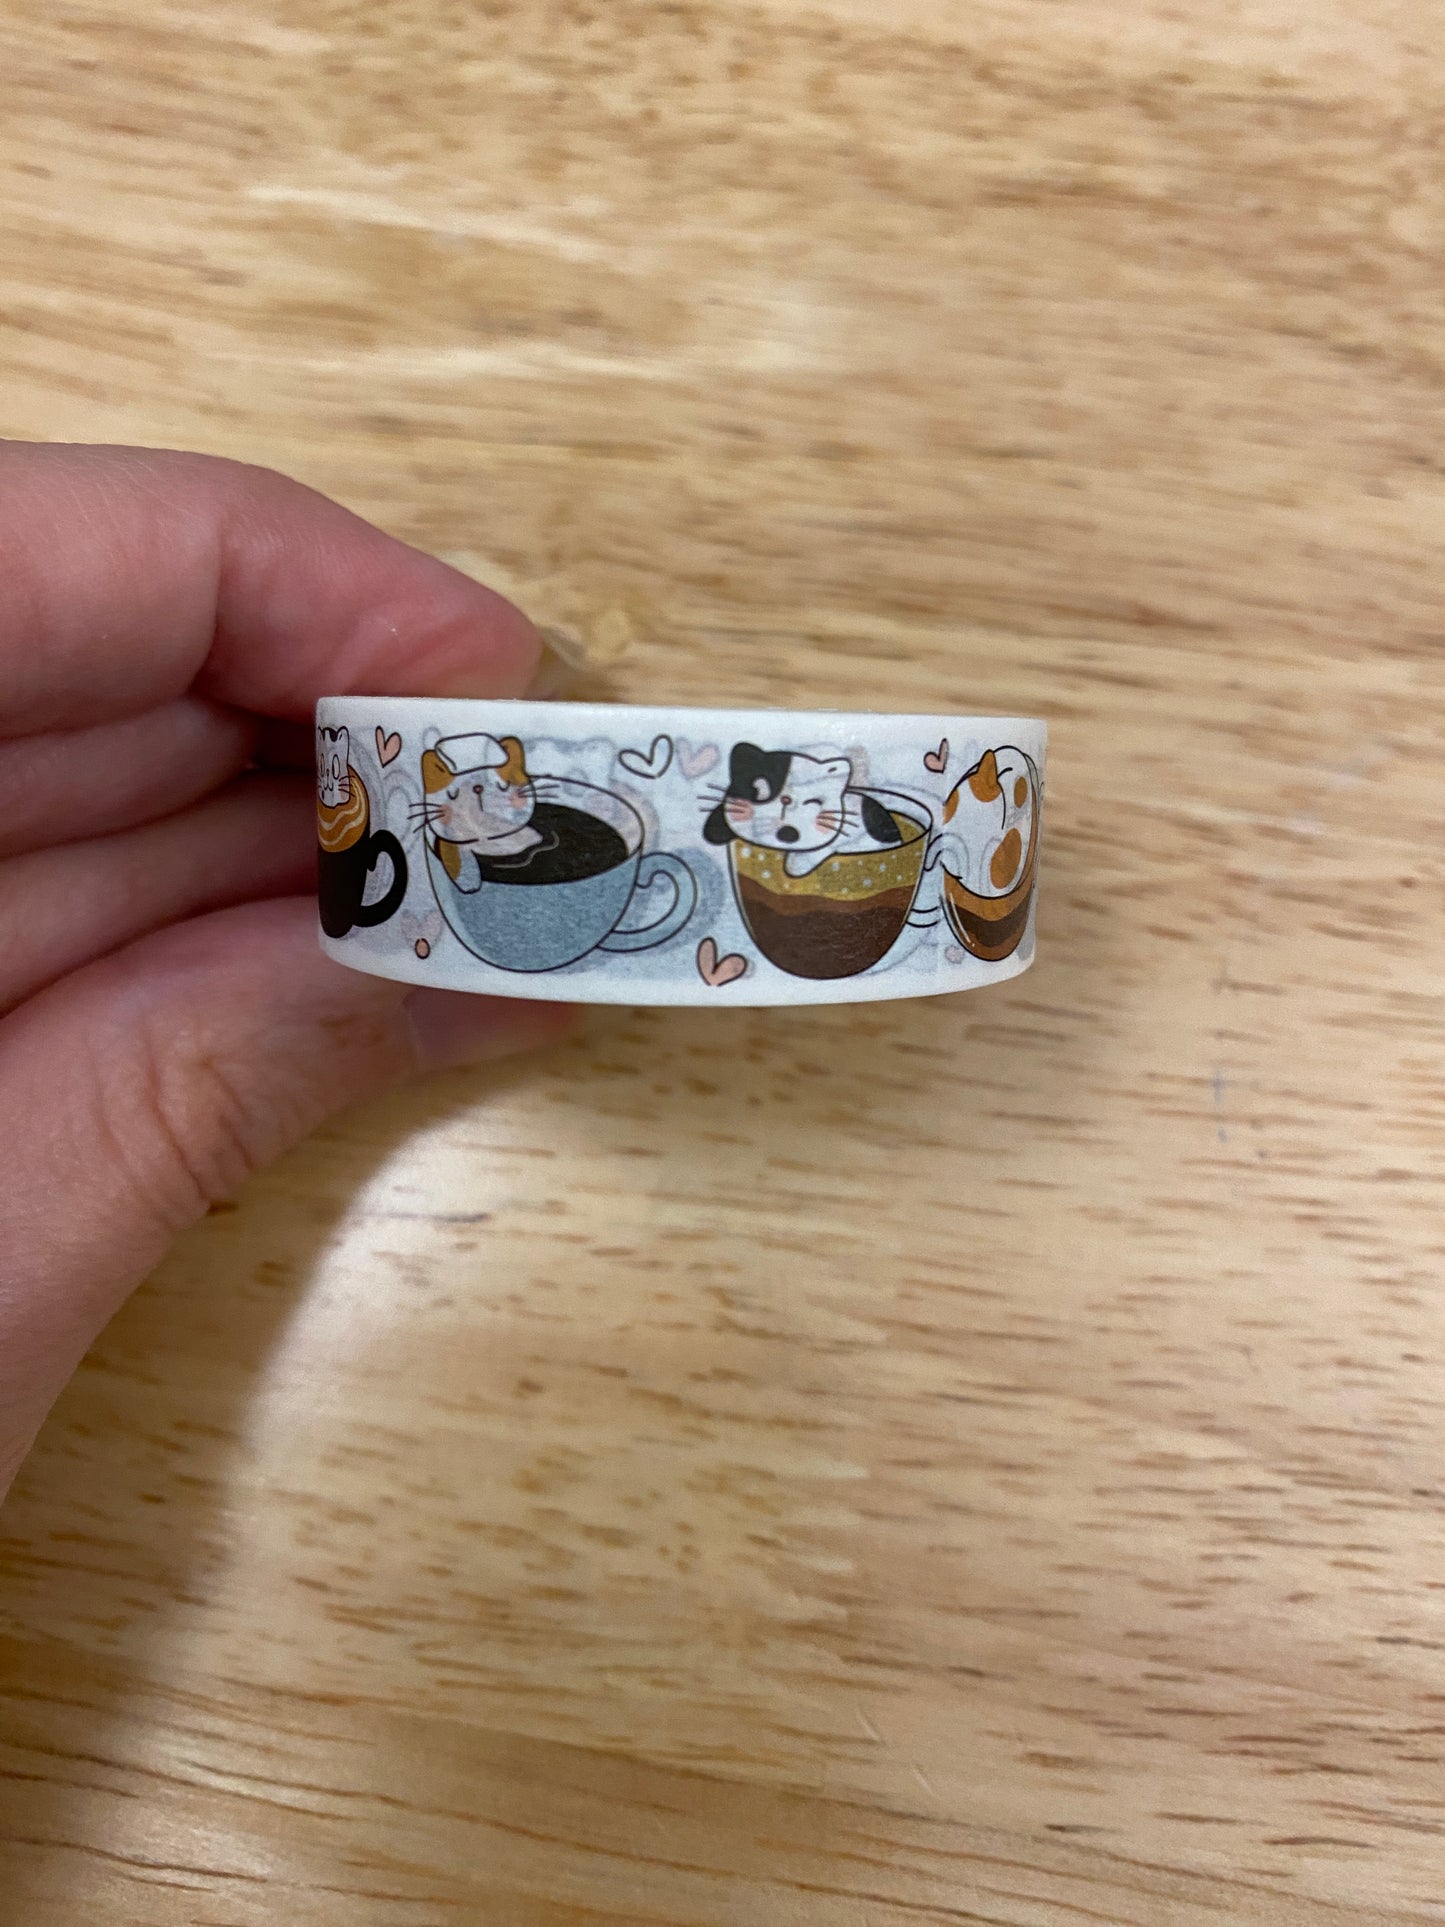 Brown Tea Cup Cats Washi Tape Big Roll, Cats with Tea Cup Washi Tape roll, Sample Washi Tape, Brown Tea Cup Cats Design Tape